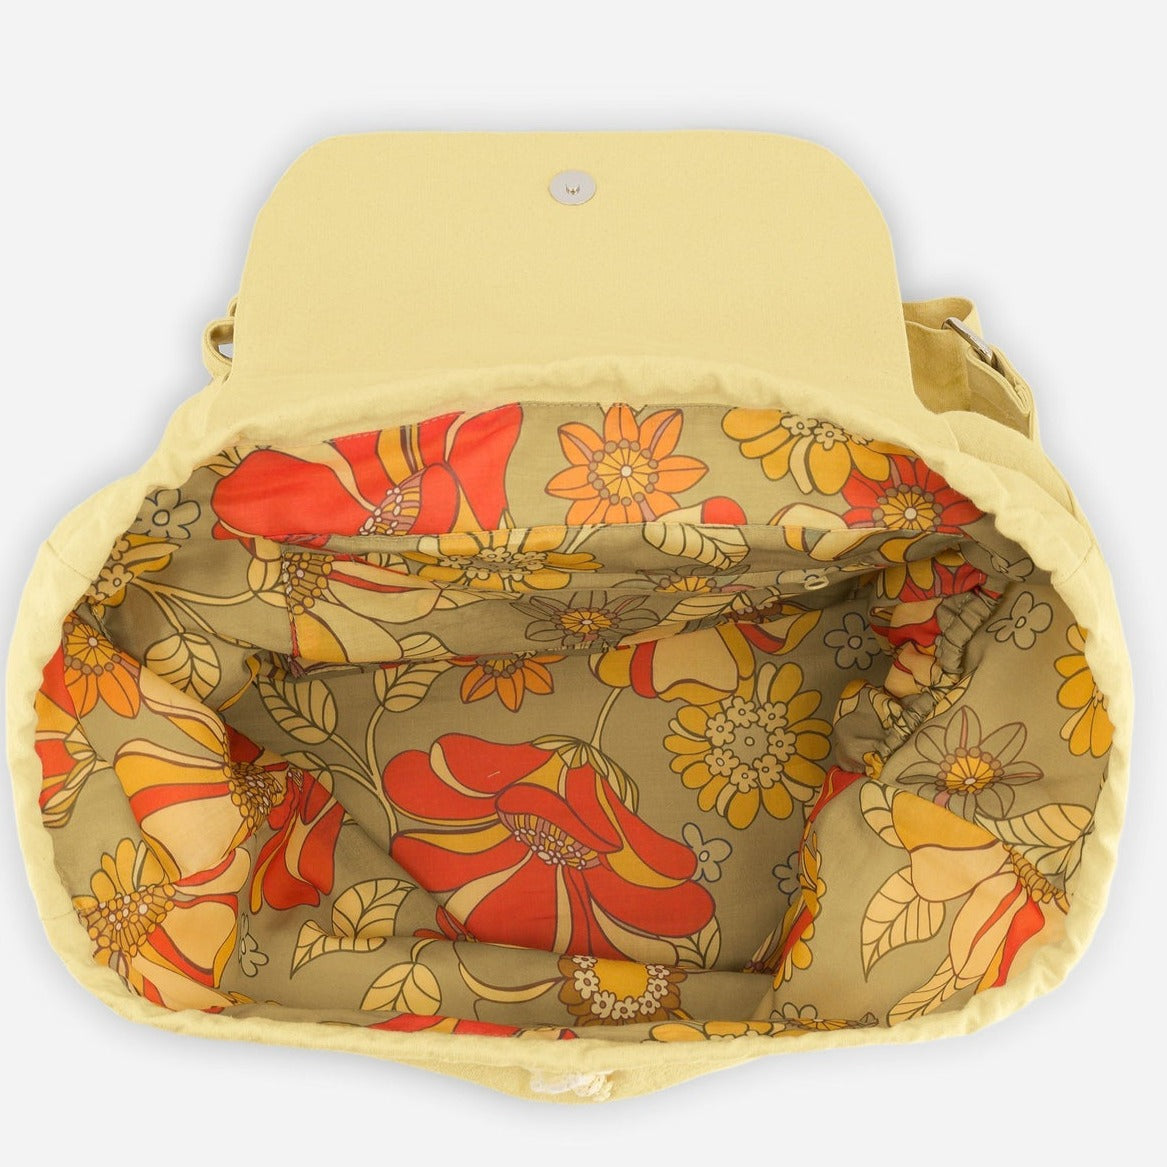 Backpack Georges yellow sun